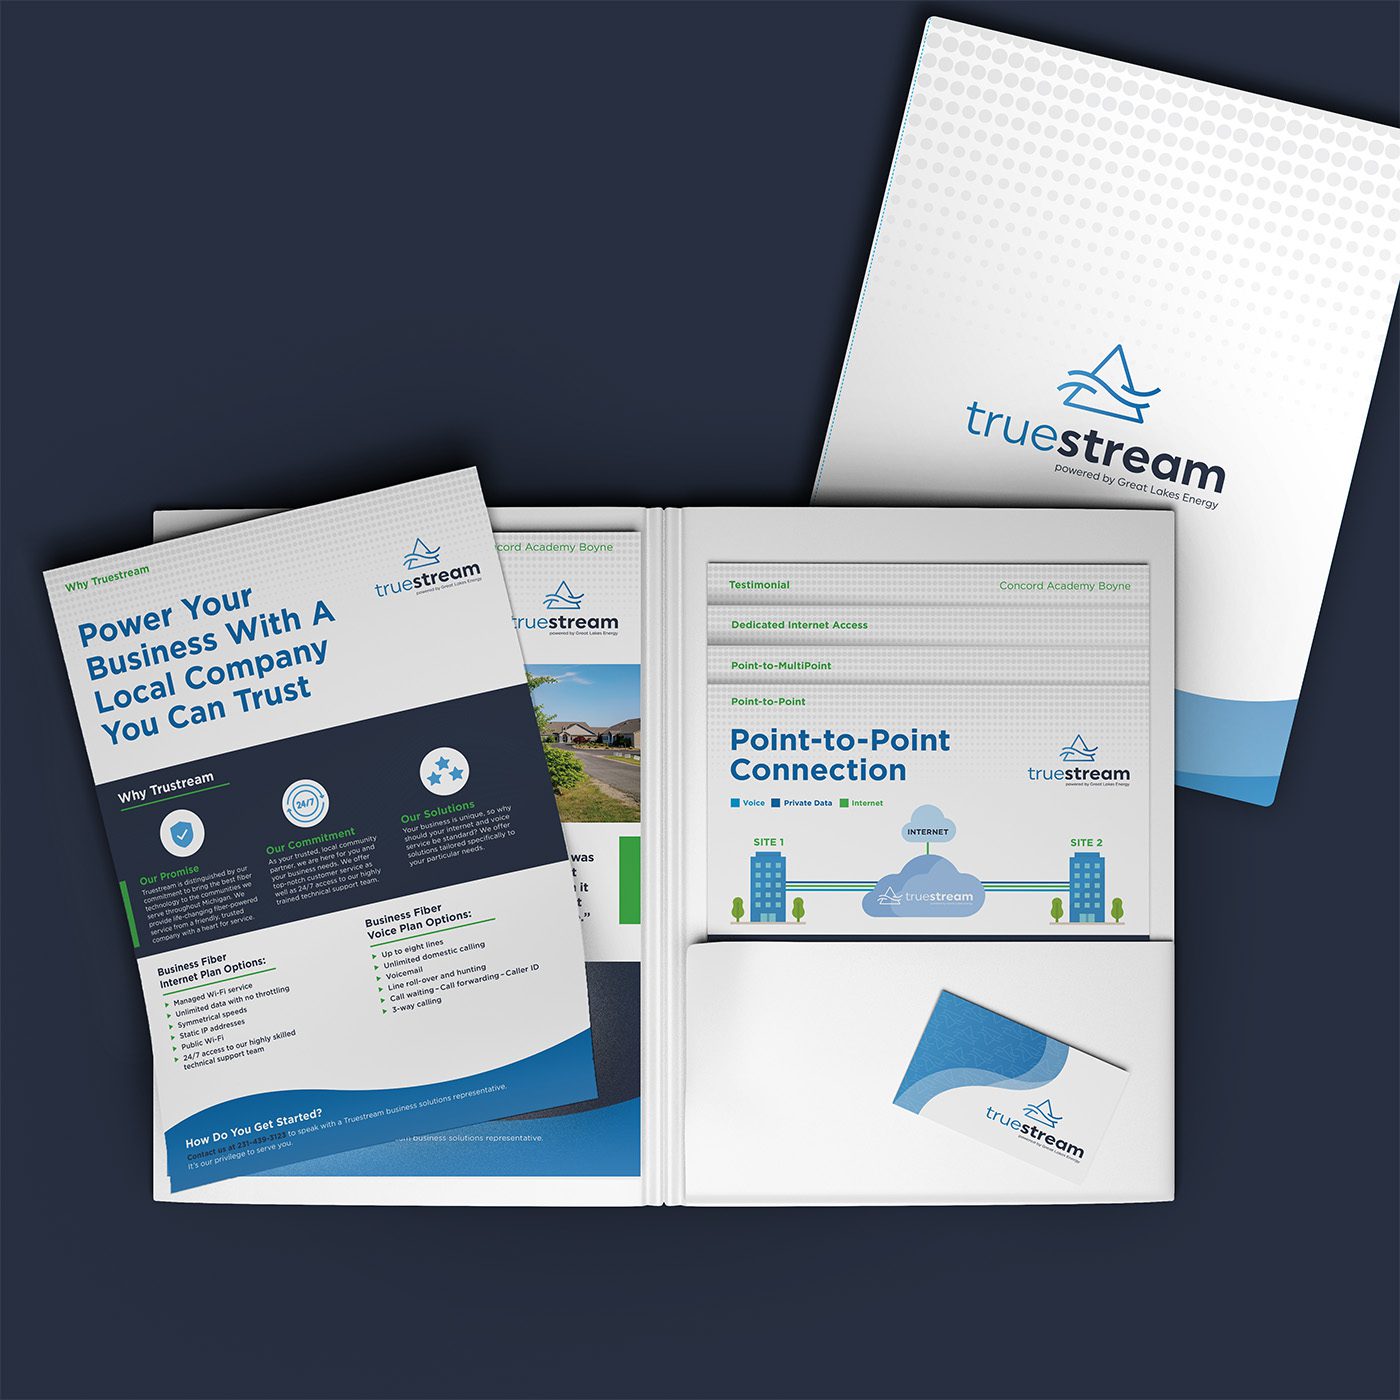 Design for the sales team toolkit used by Truestream internet to inform and convert business class customers